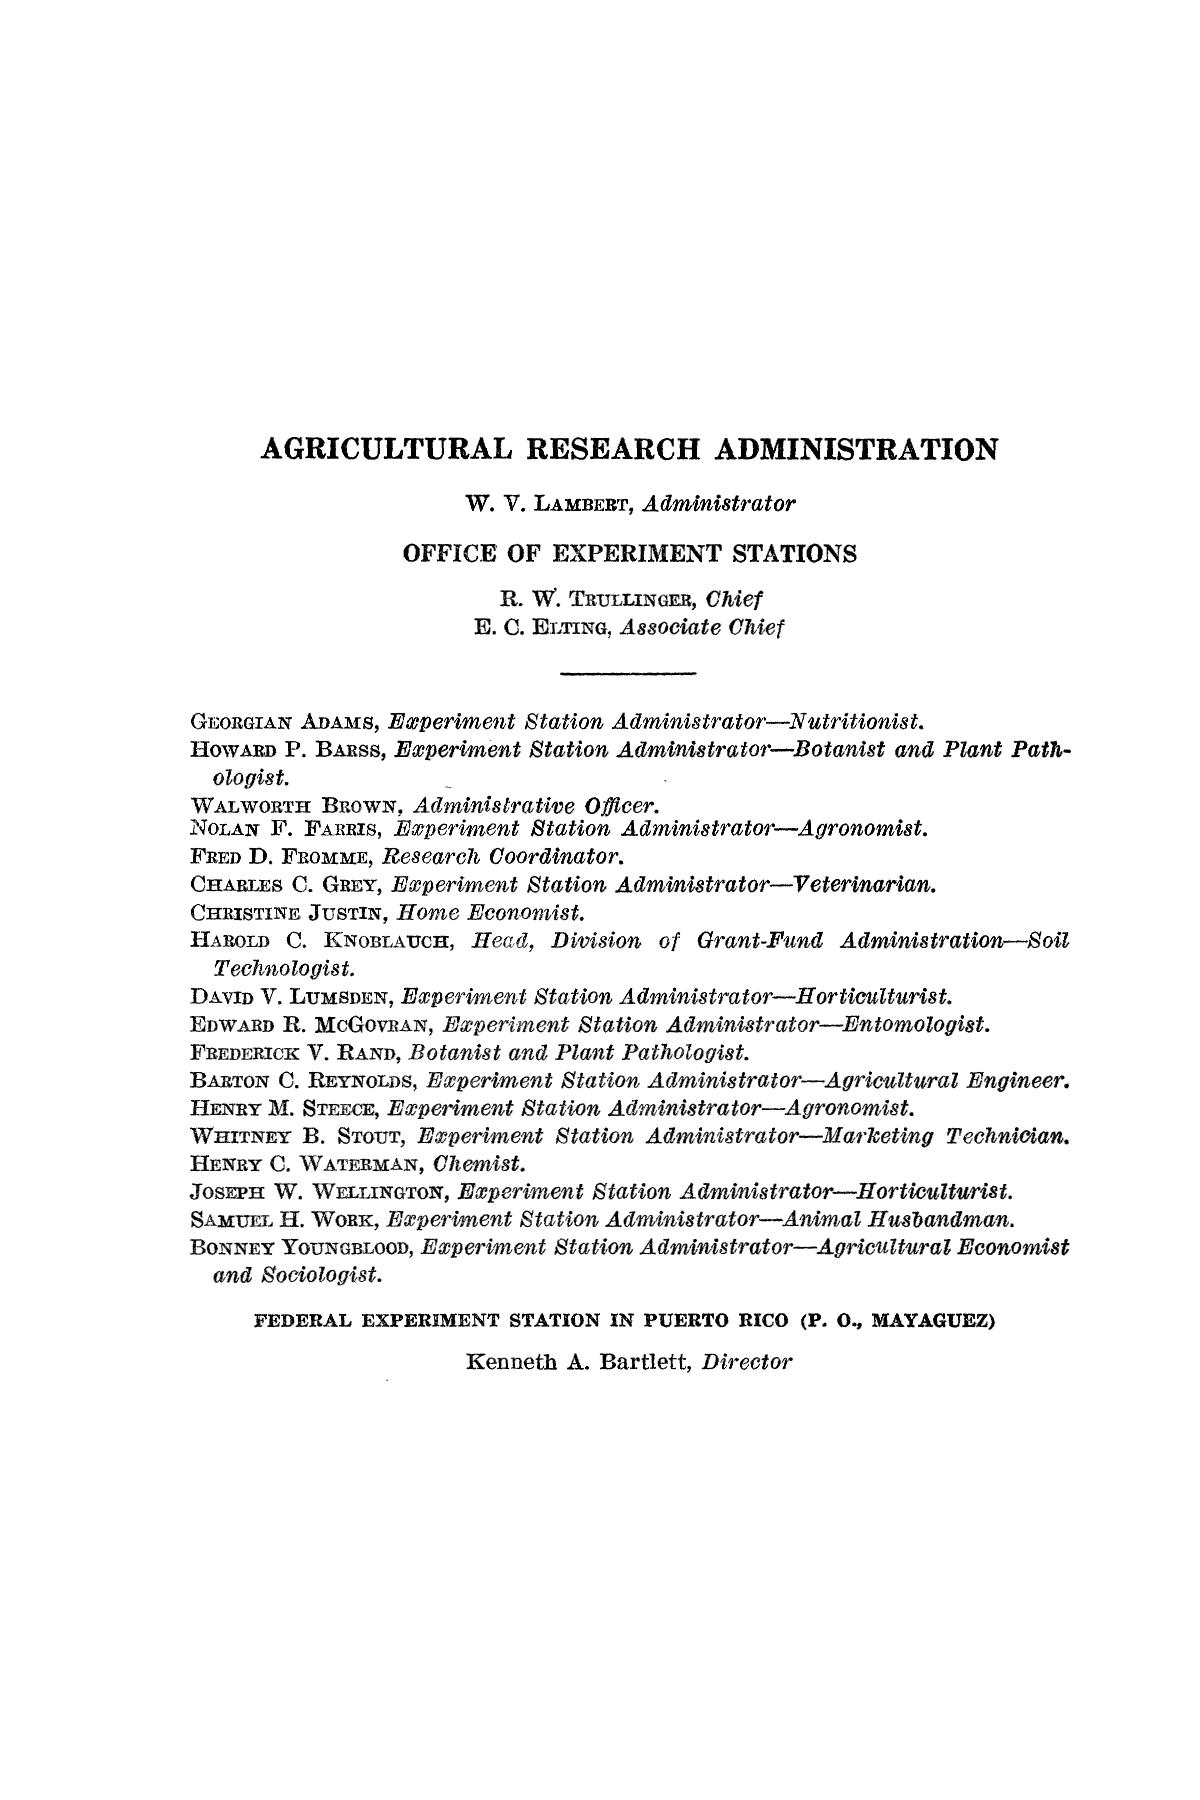 Report on the Agricultural Experiment Stations, 1947
                                                
                                                    None
                                                